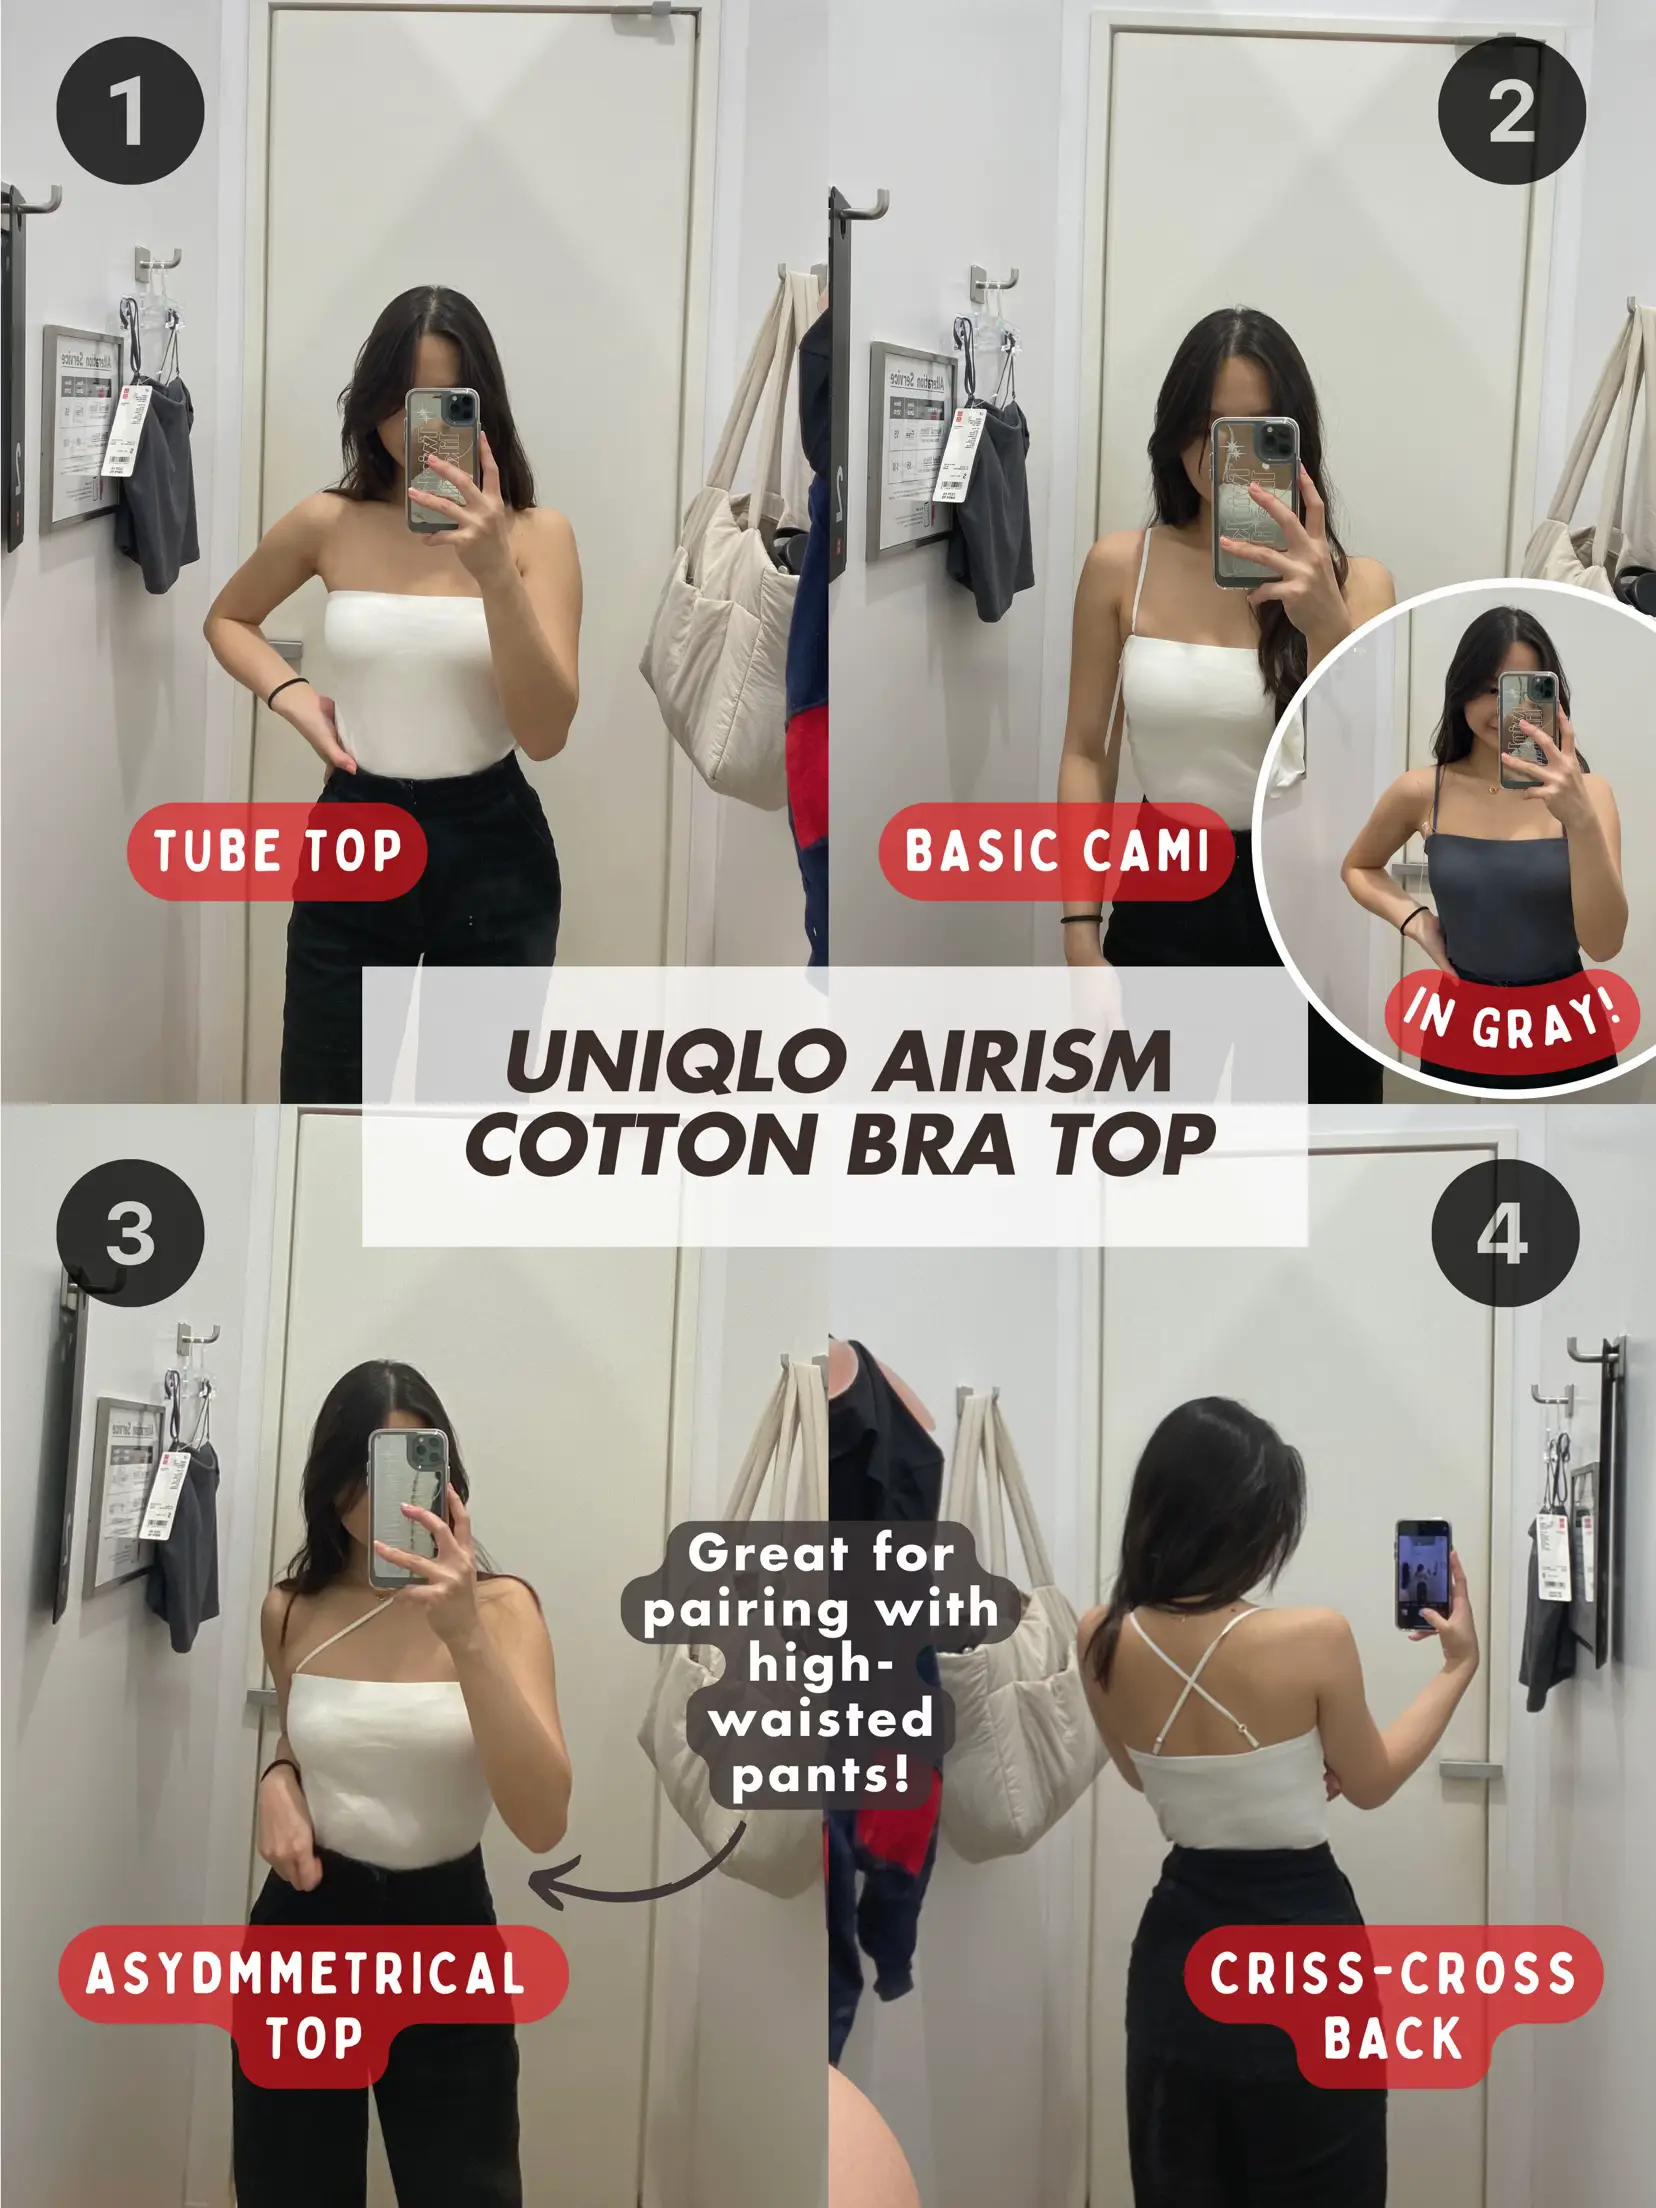 Trying on the uniqo bra top! I love a basic staple 🥰 #uniqlo